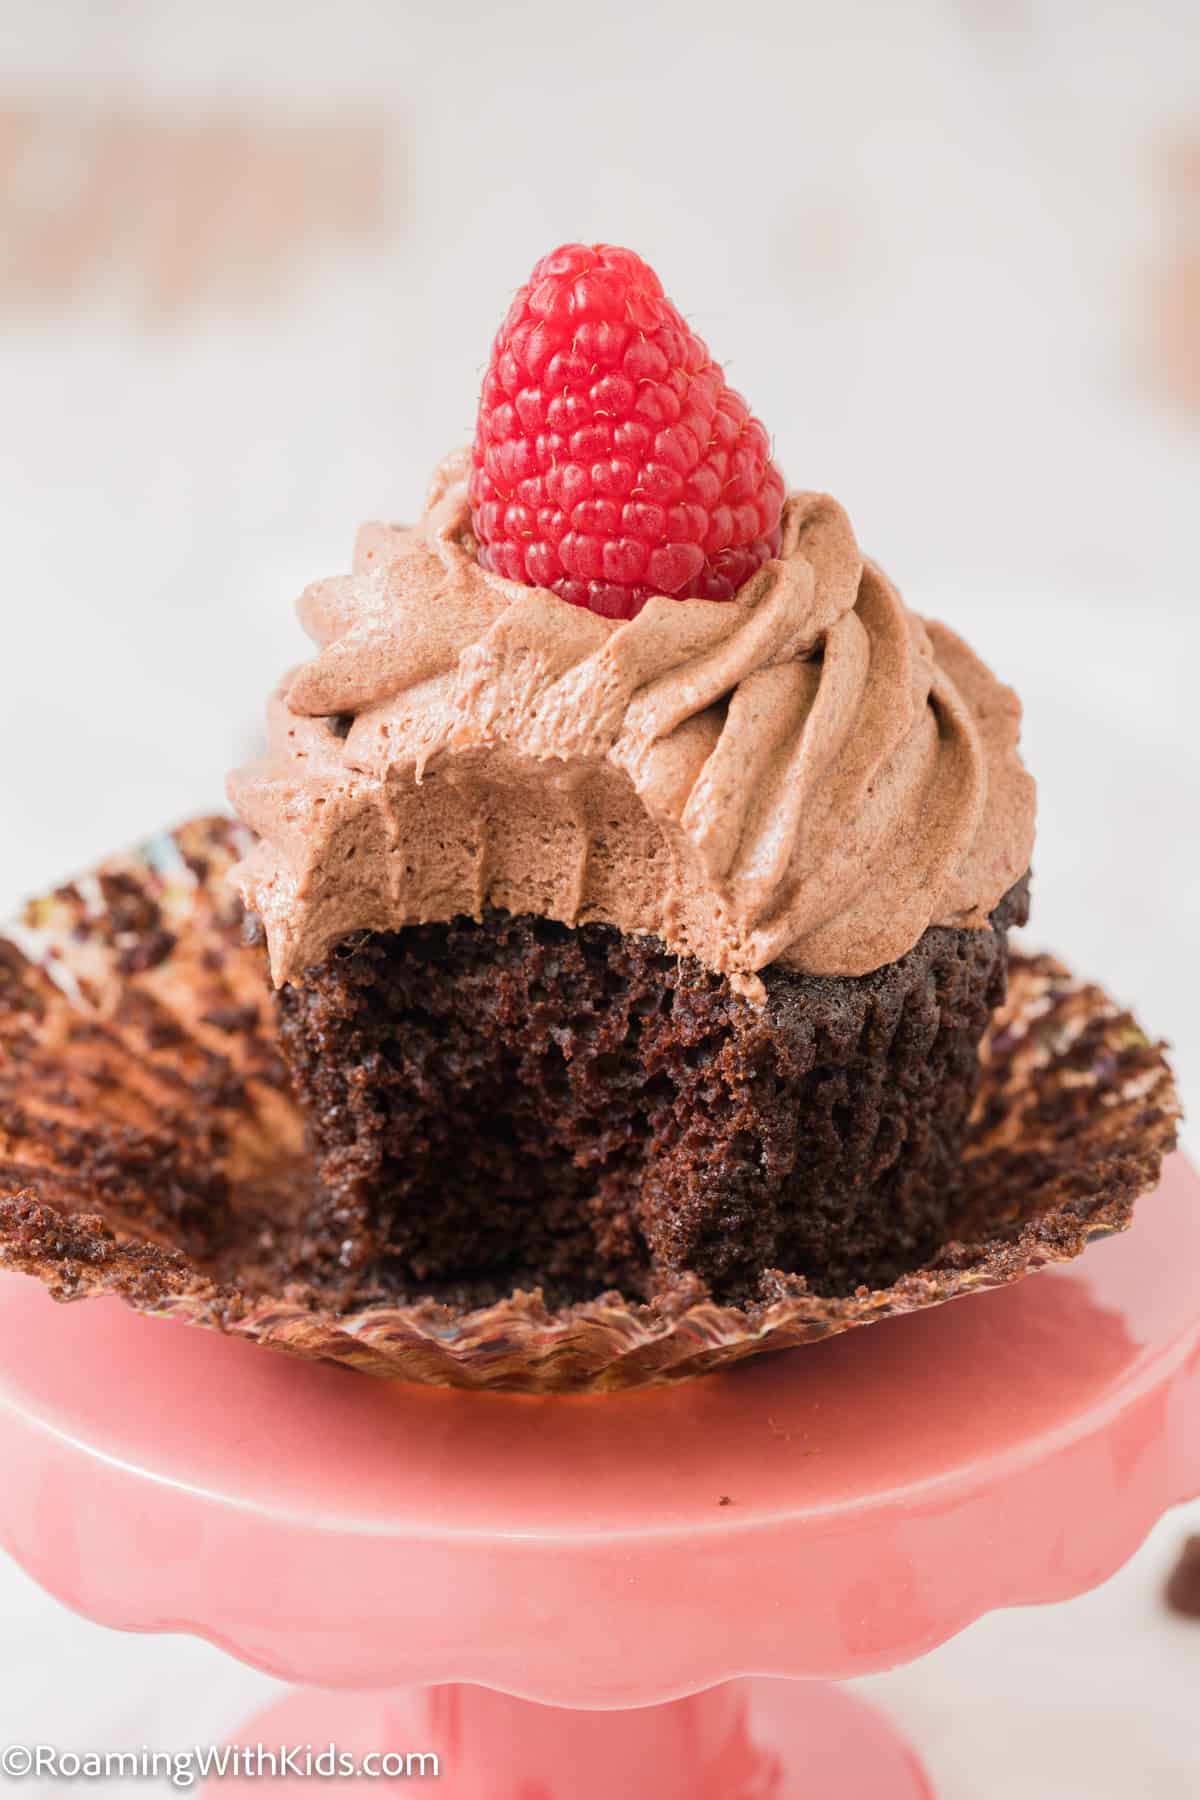 Chocolate Raspberry Cupcake with a bite taken out of it sitting in a cupcake wrapper